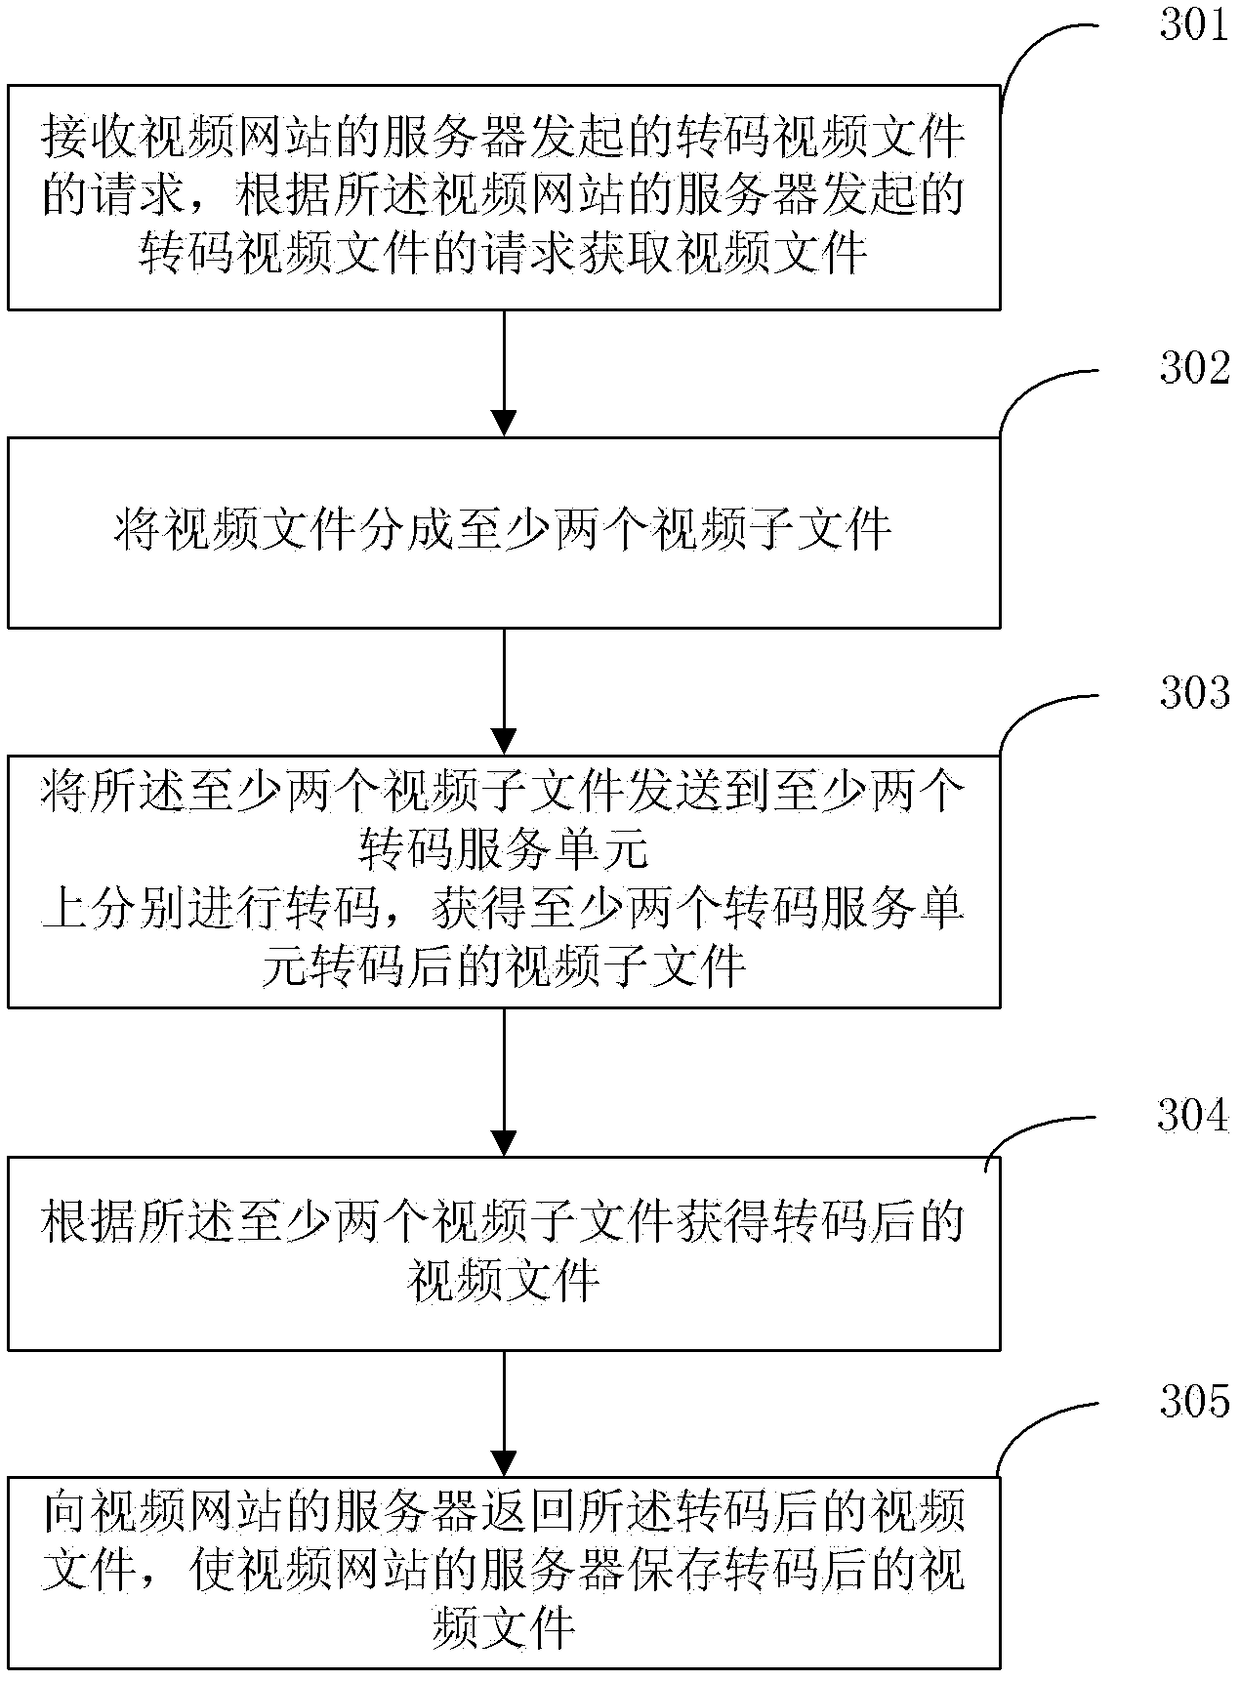 Video file processing method, device, video server and system